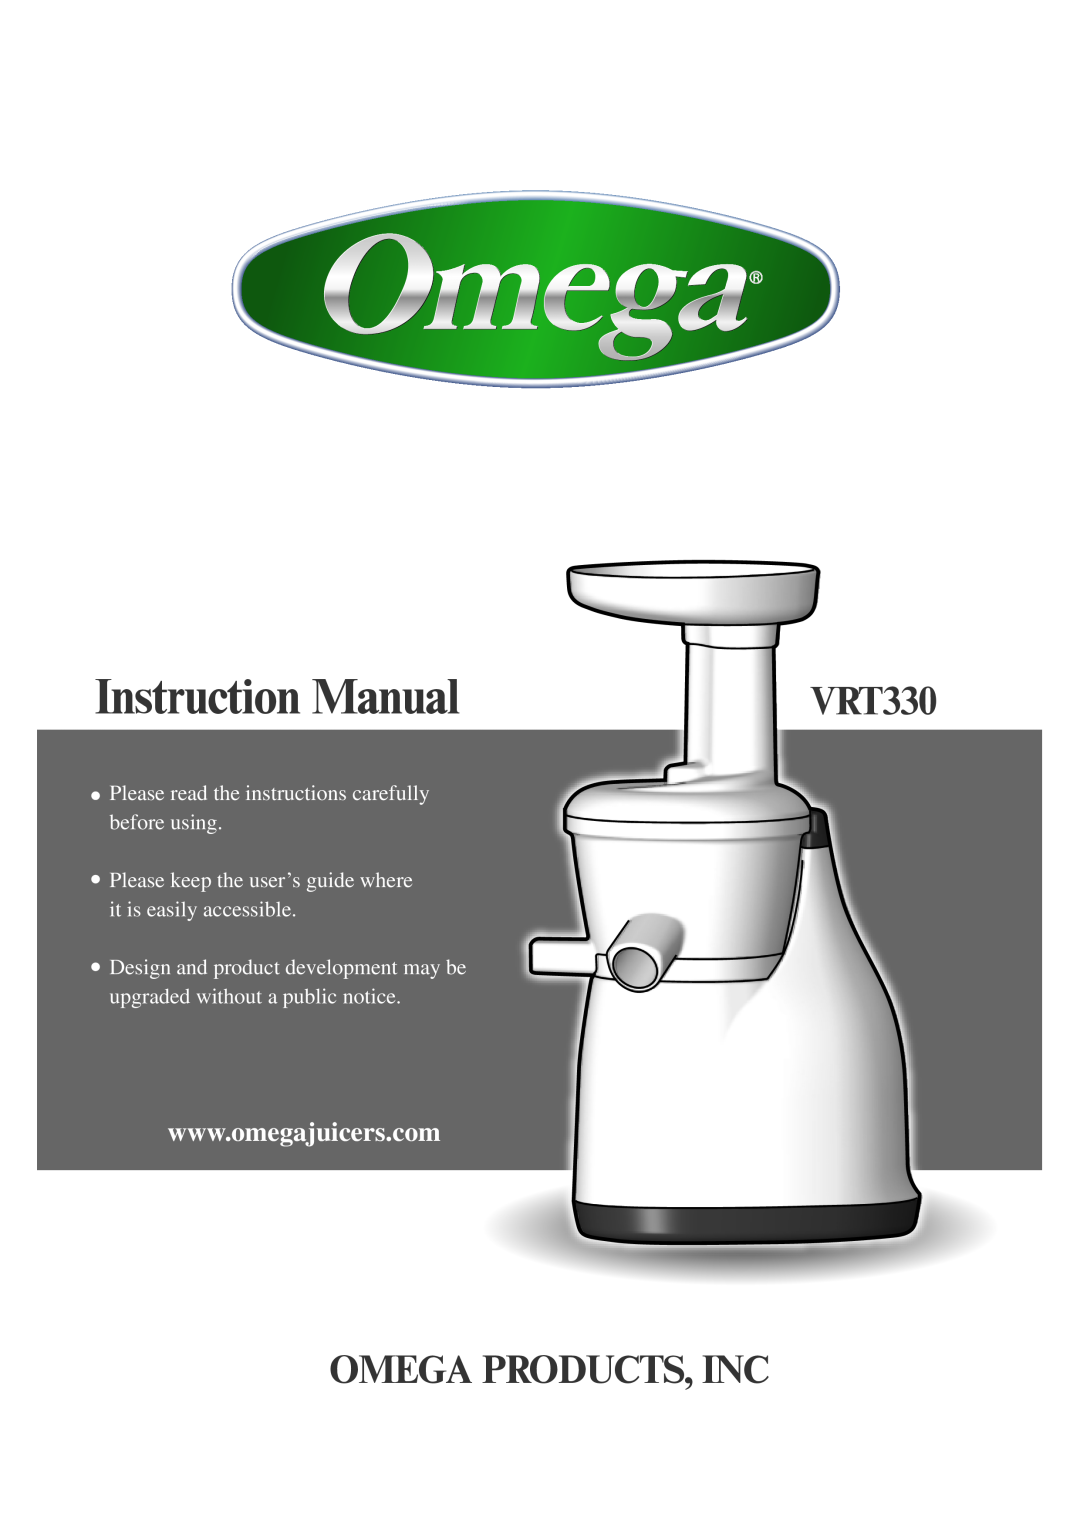 Omega VRT350HD, BMJ330 instruction manual Omega Products, Inc, VRT330, Please read the instructions carefully before using 